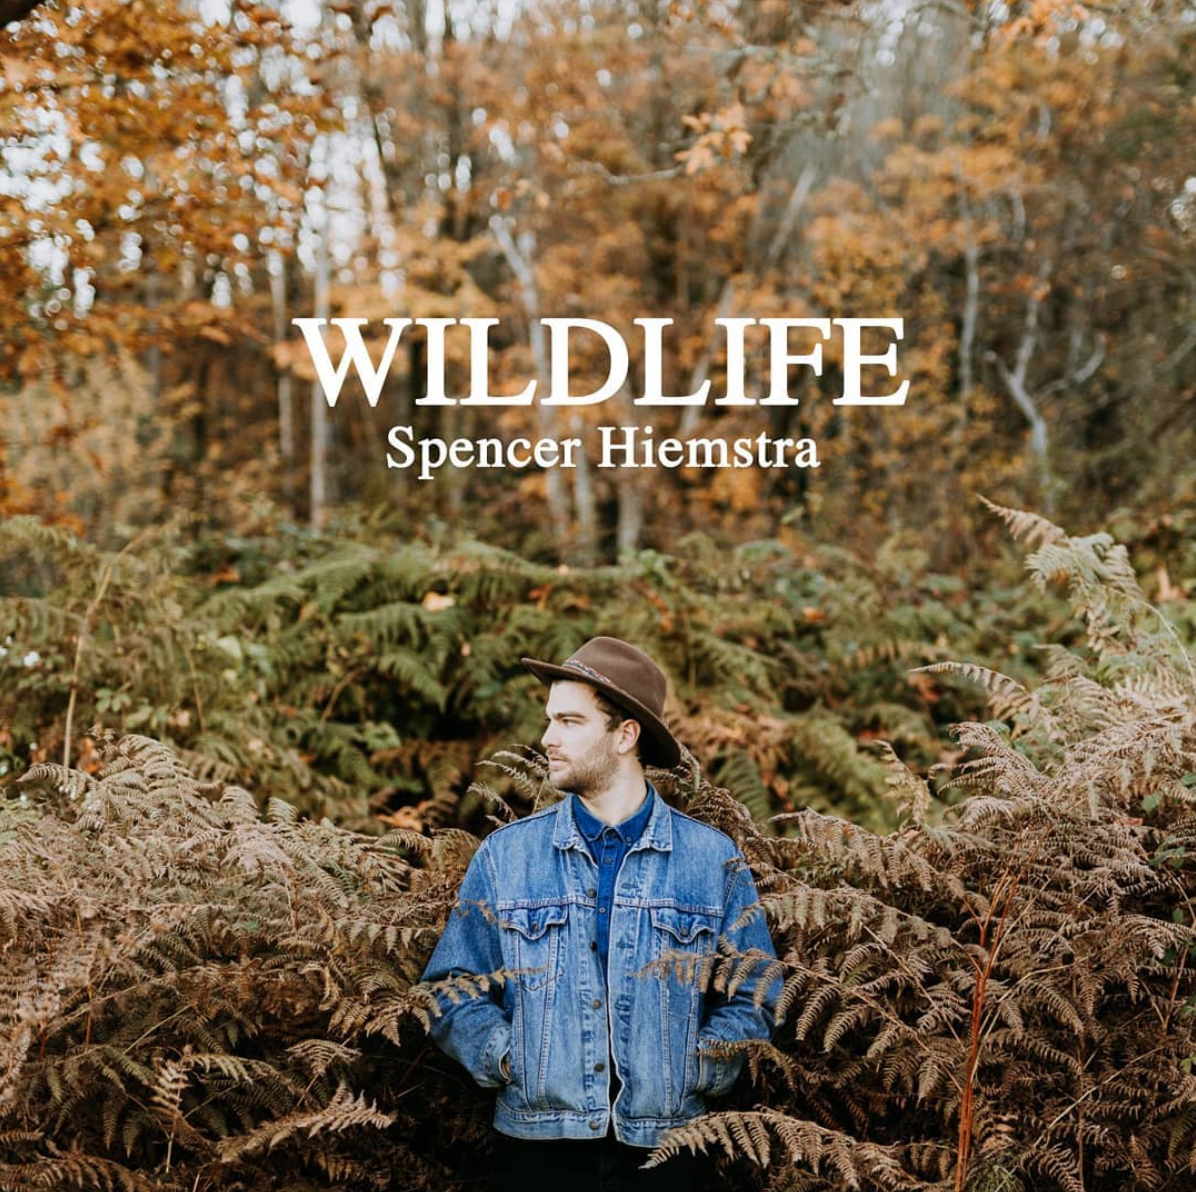 Album cover for Spencer Hiemstra's album Wildlife, pictures Hiemstra standing in a forest with brown and green ferns and orange-leaved trees.